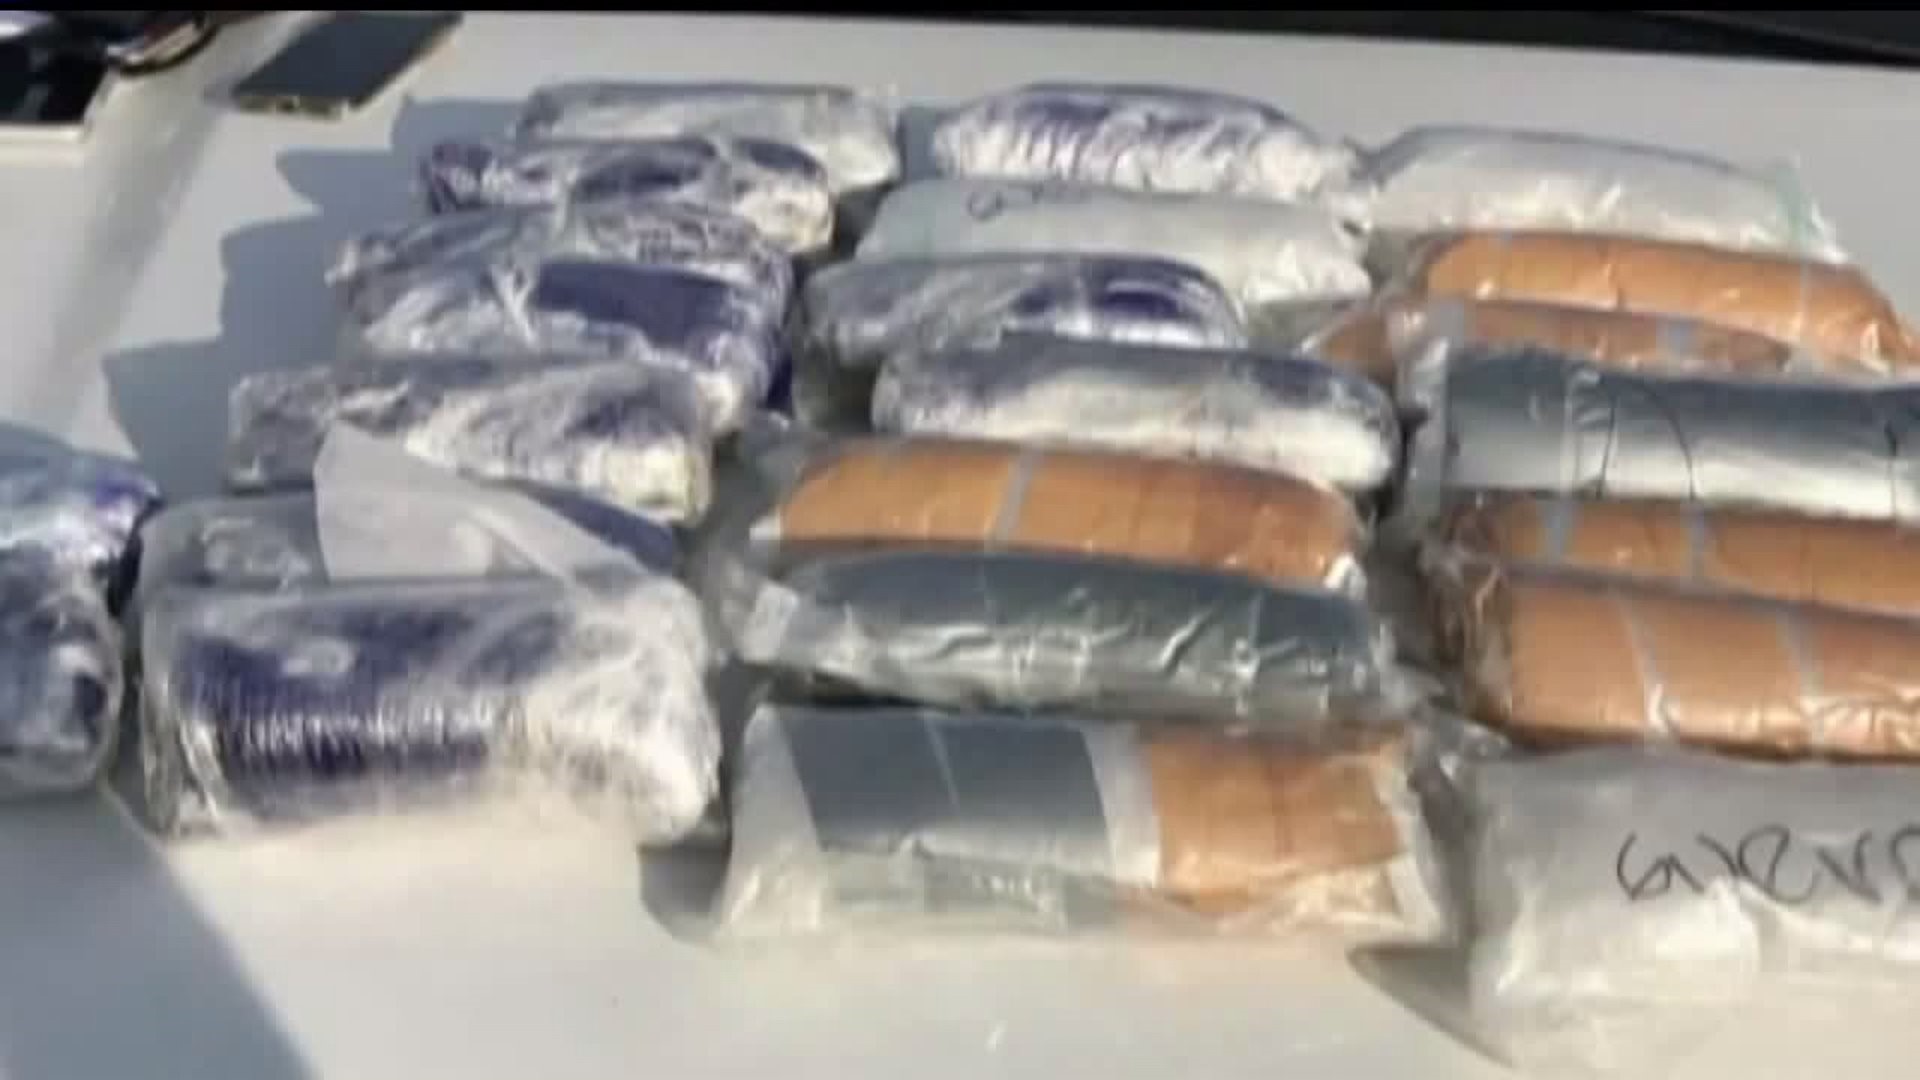 Cracking down on drug trafficking in Lancaster County